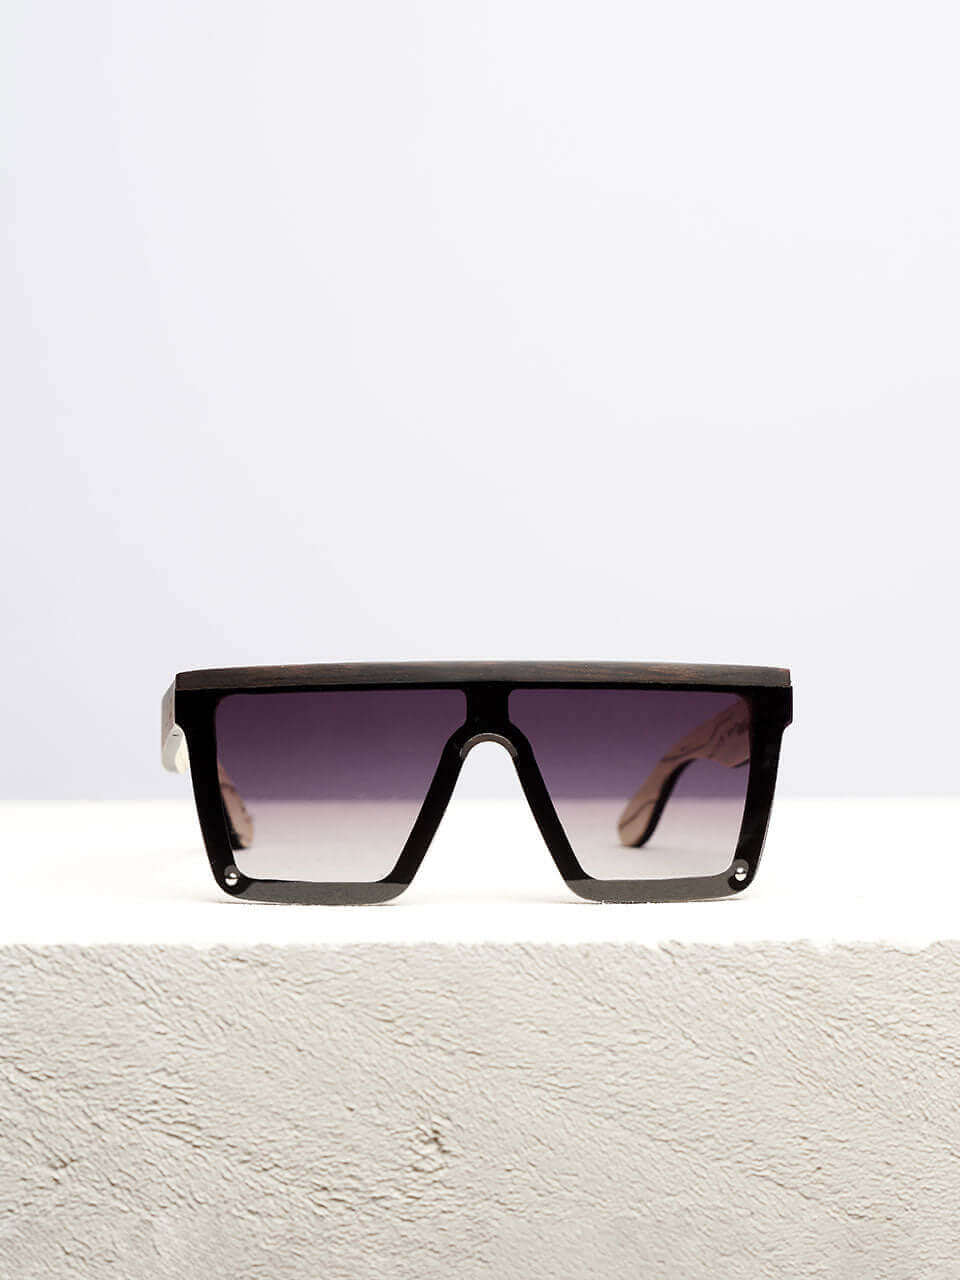 a pair of wooden sunglasses